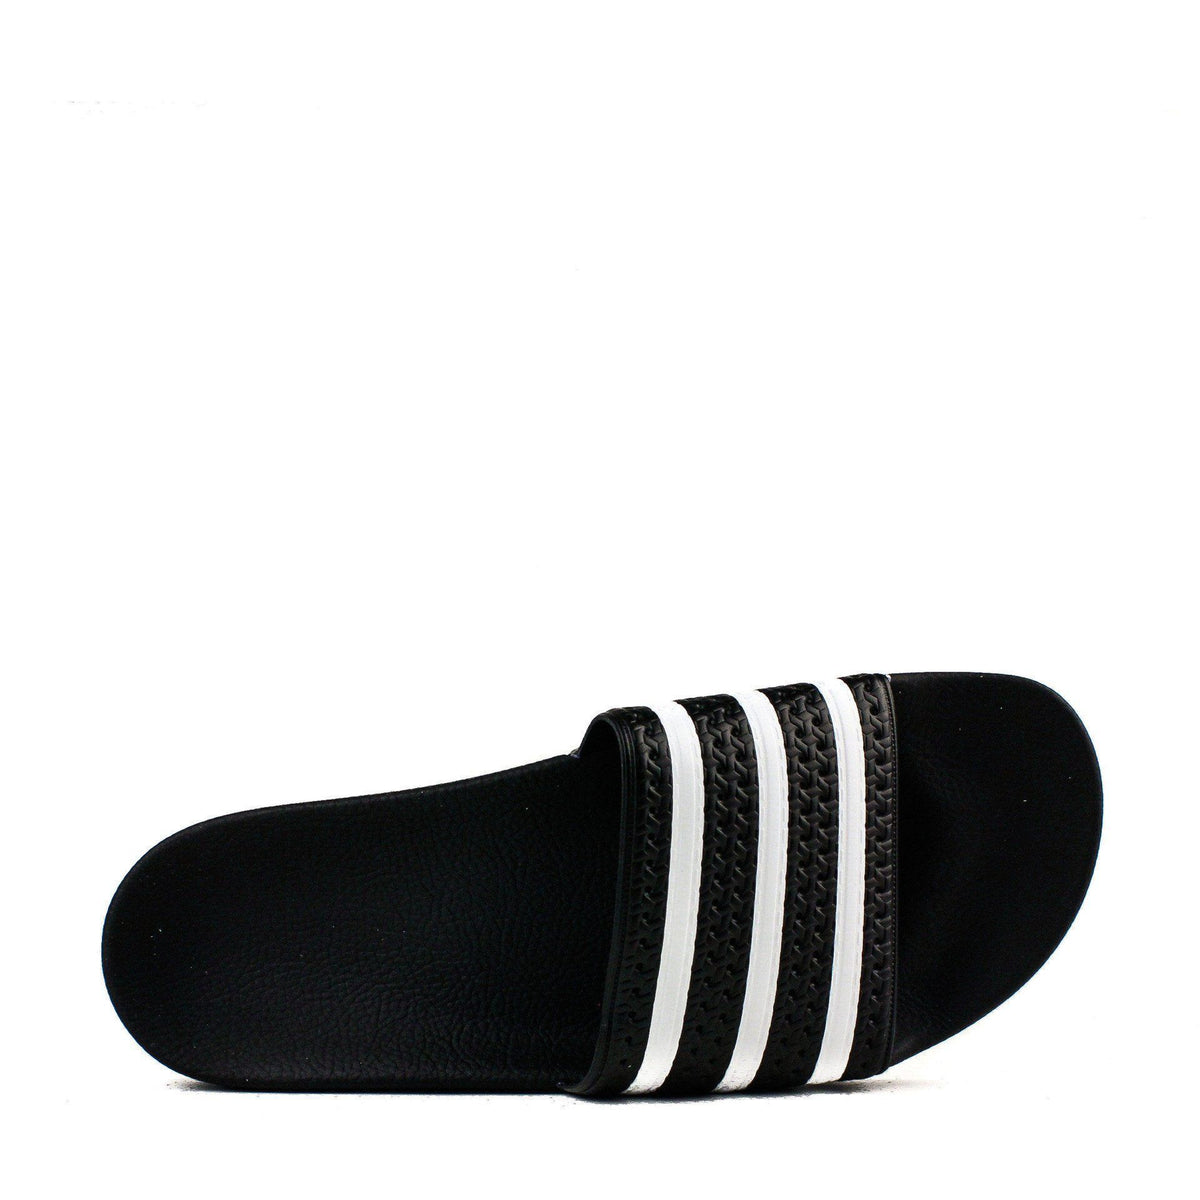 1) adidas workers in china today images - JofemarShops - Adidas Originals  Adilette Black White Slides Made Easy Italy 280647 (Fast shipping)